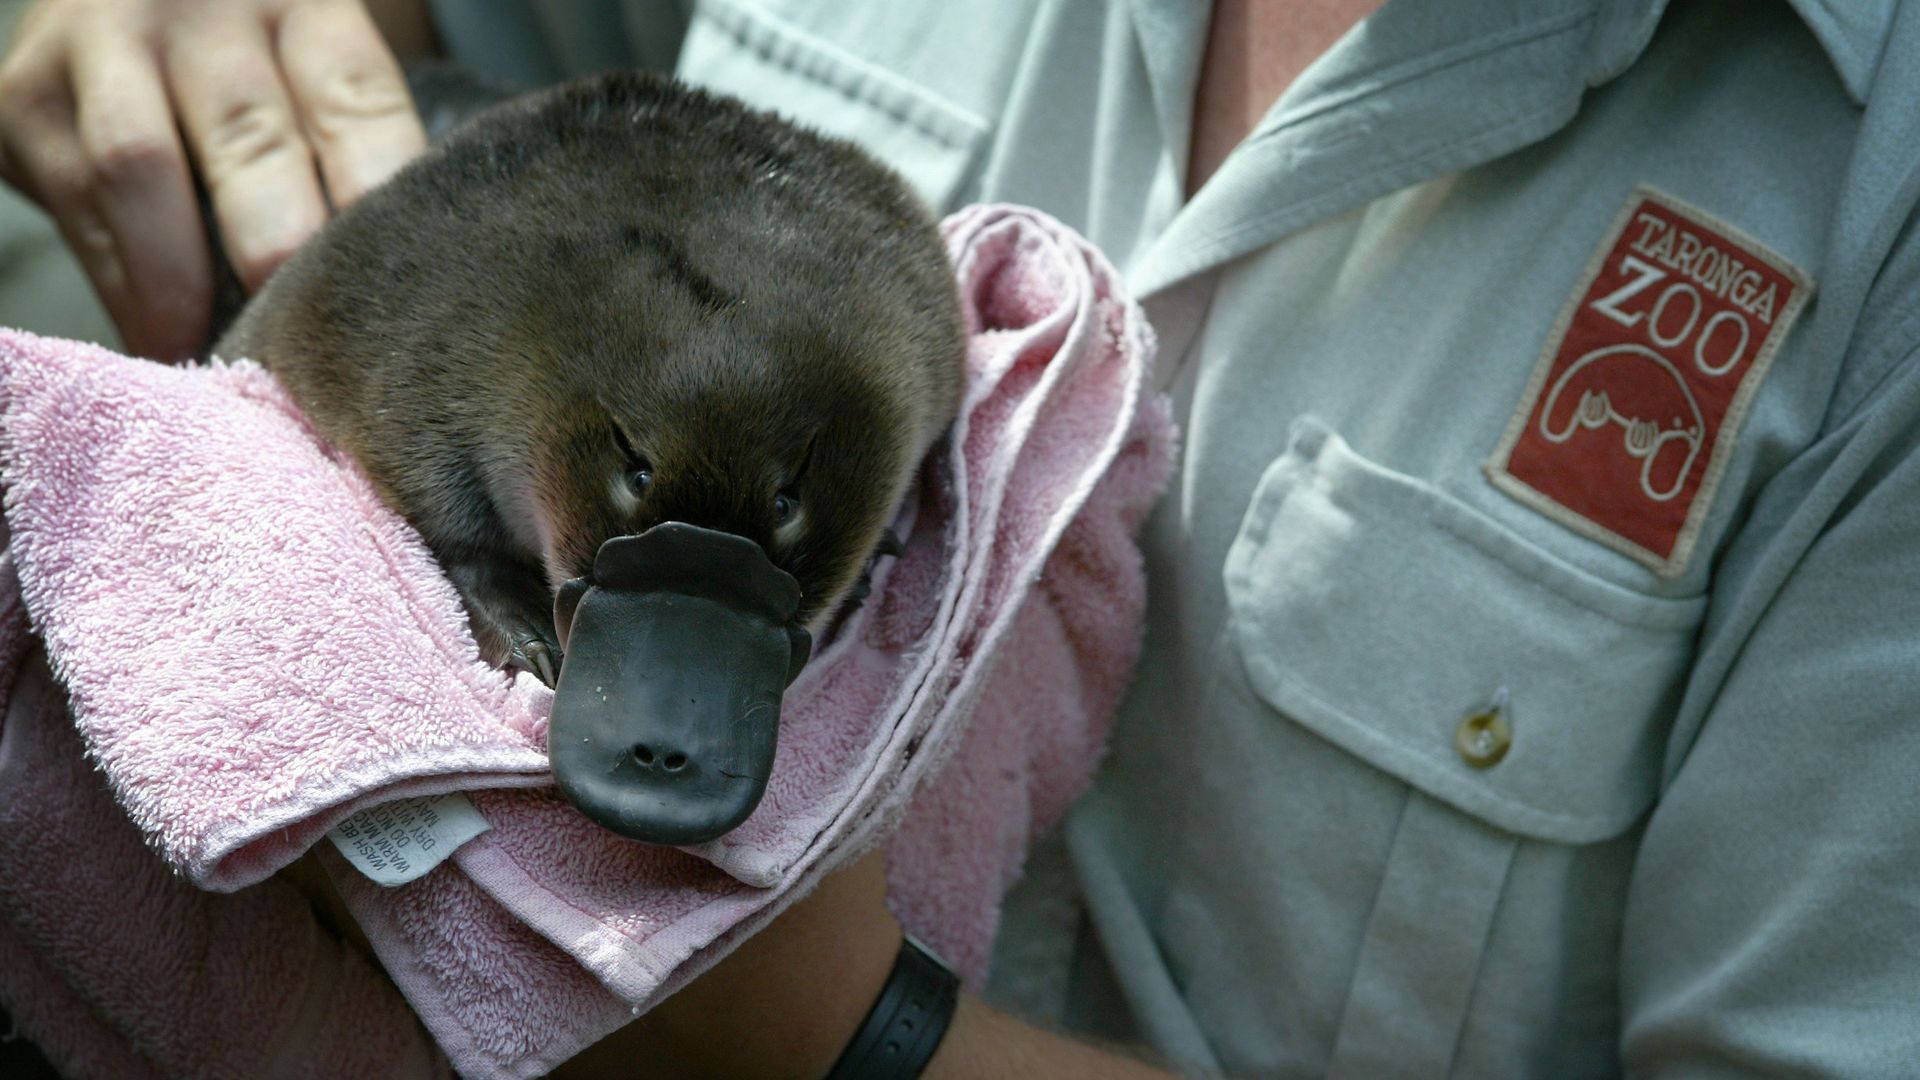  A keeper at Taronga Zoo holds a baby platypus